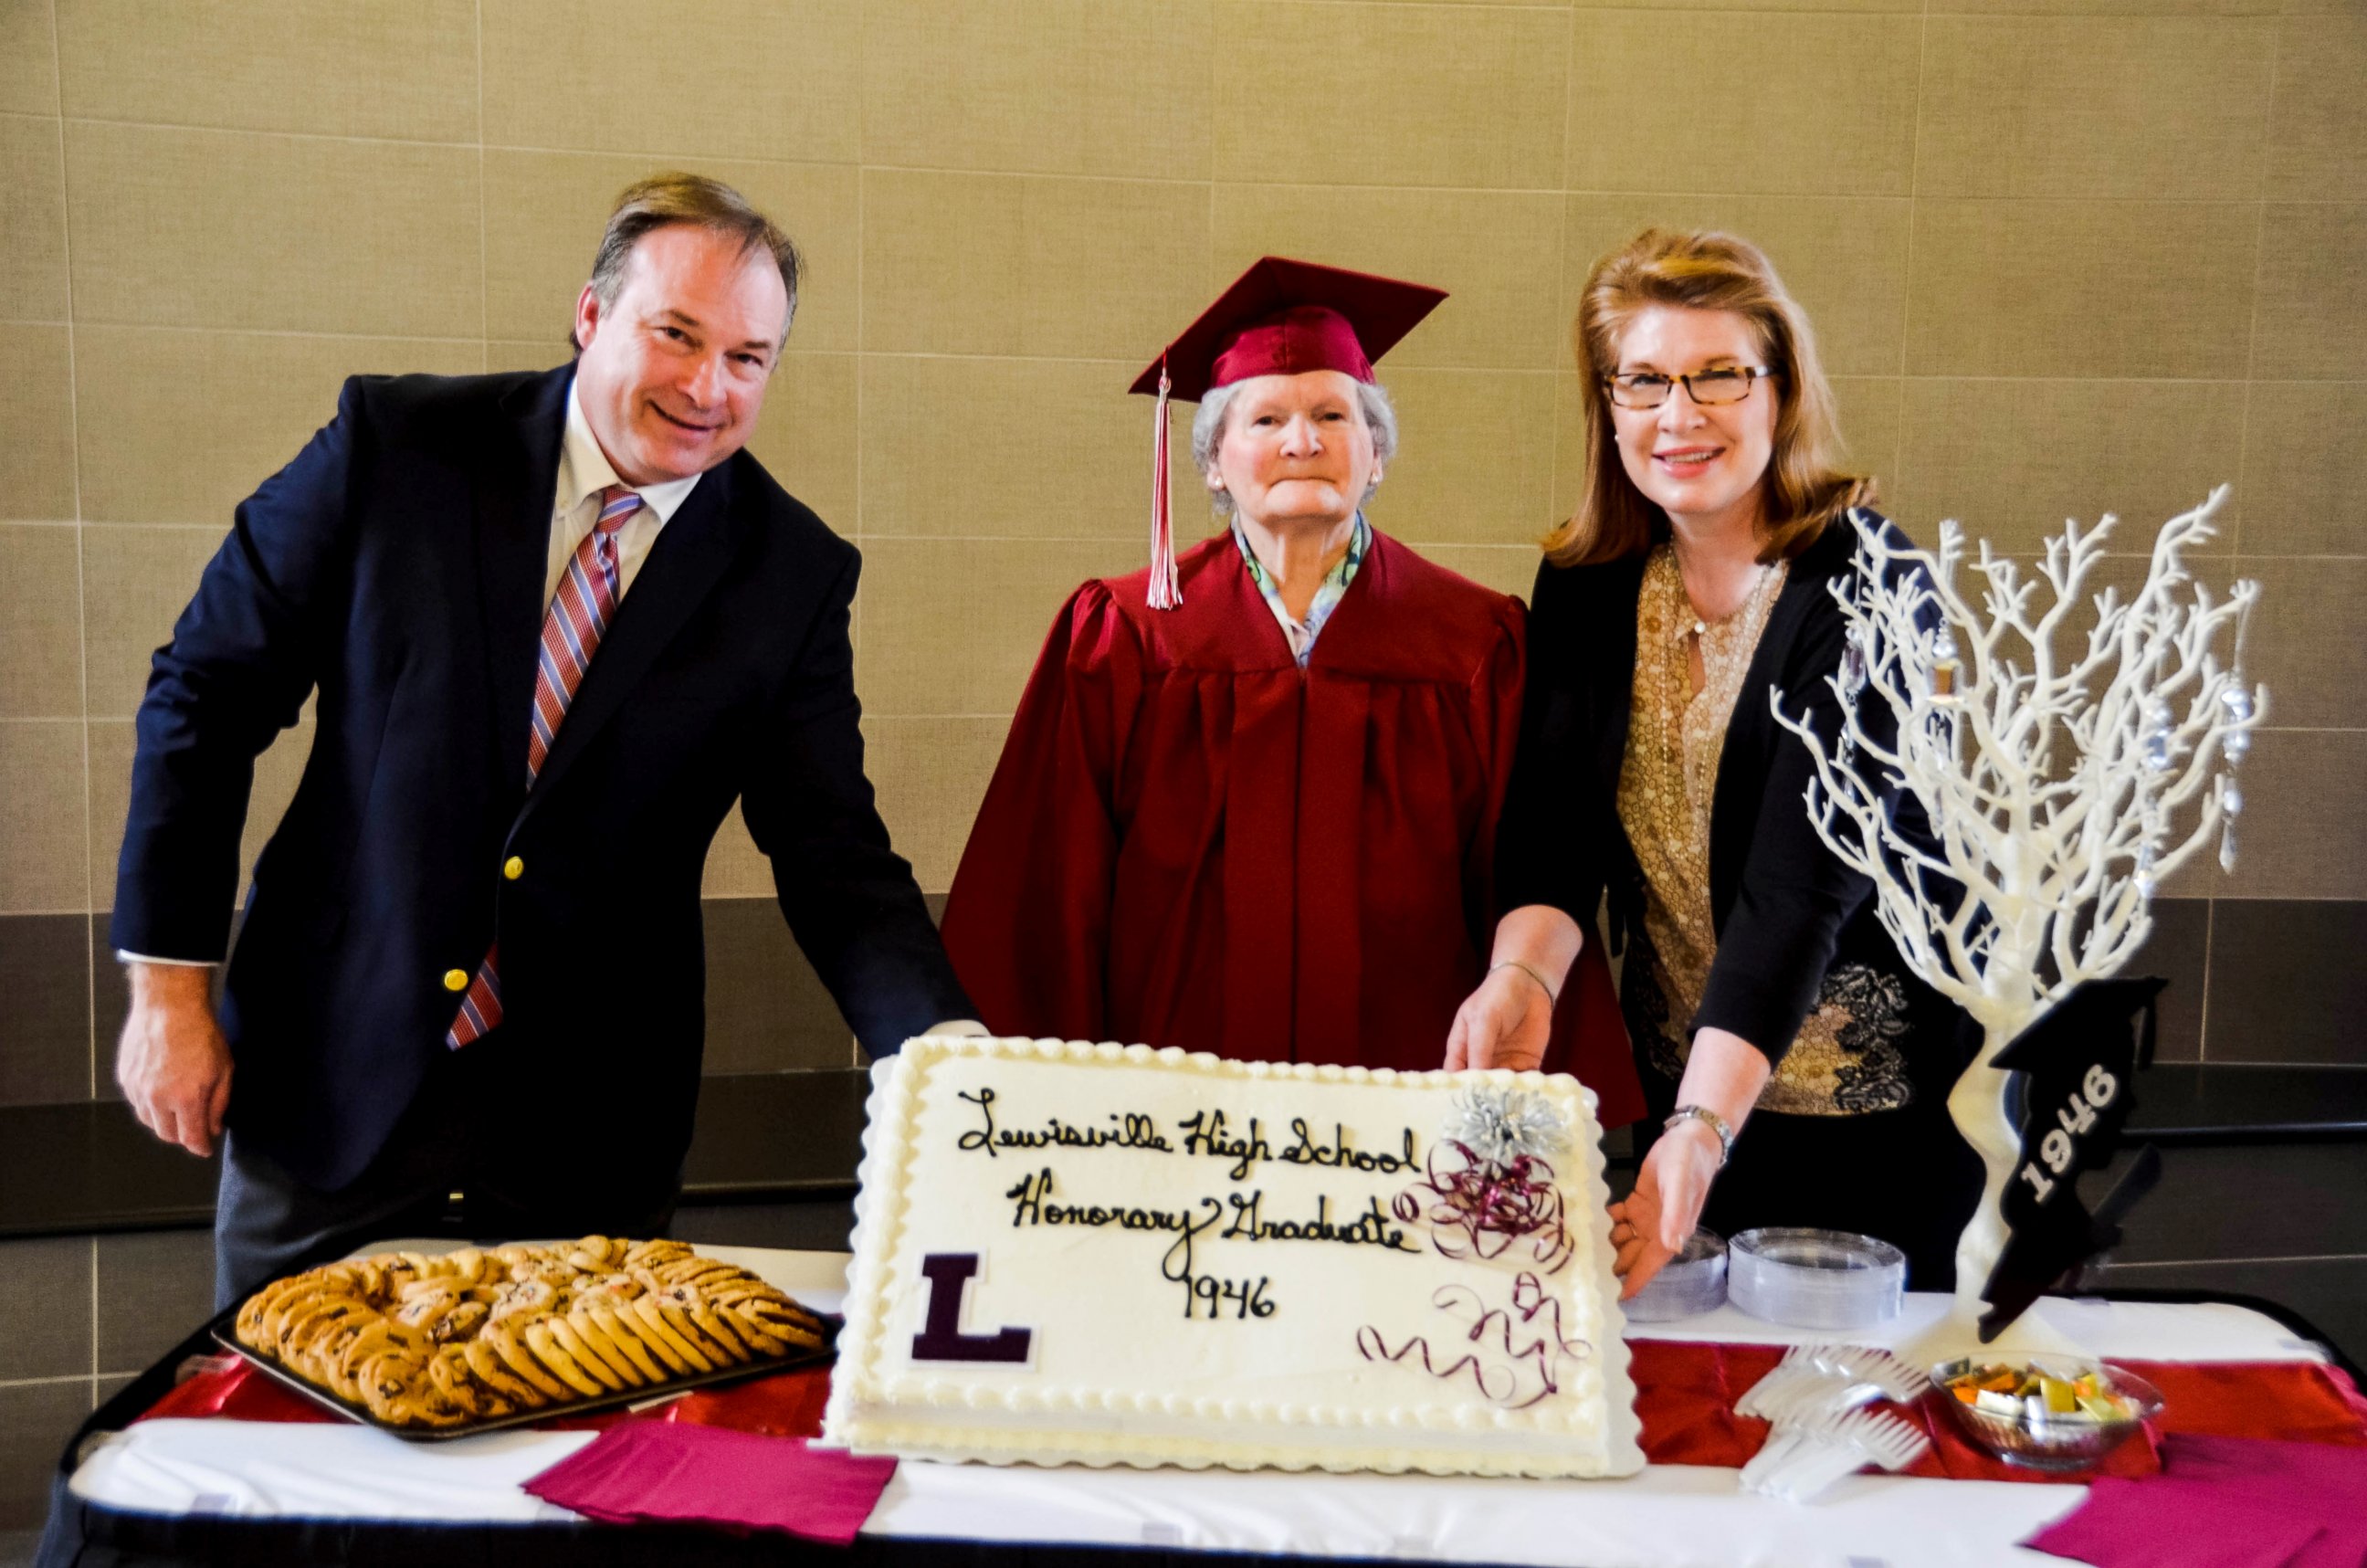 PHOTO: Frankie Sprabary, 88, received an honorary high school diploma from Lewisville High School in Lewisville, Texas, on Feb. 6, 2017. 